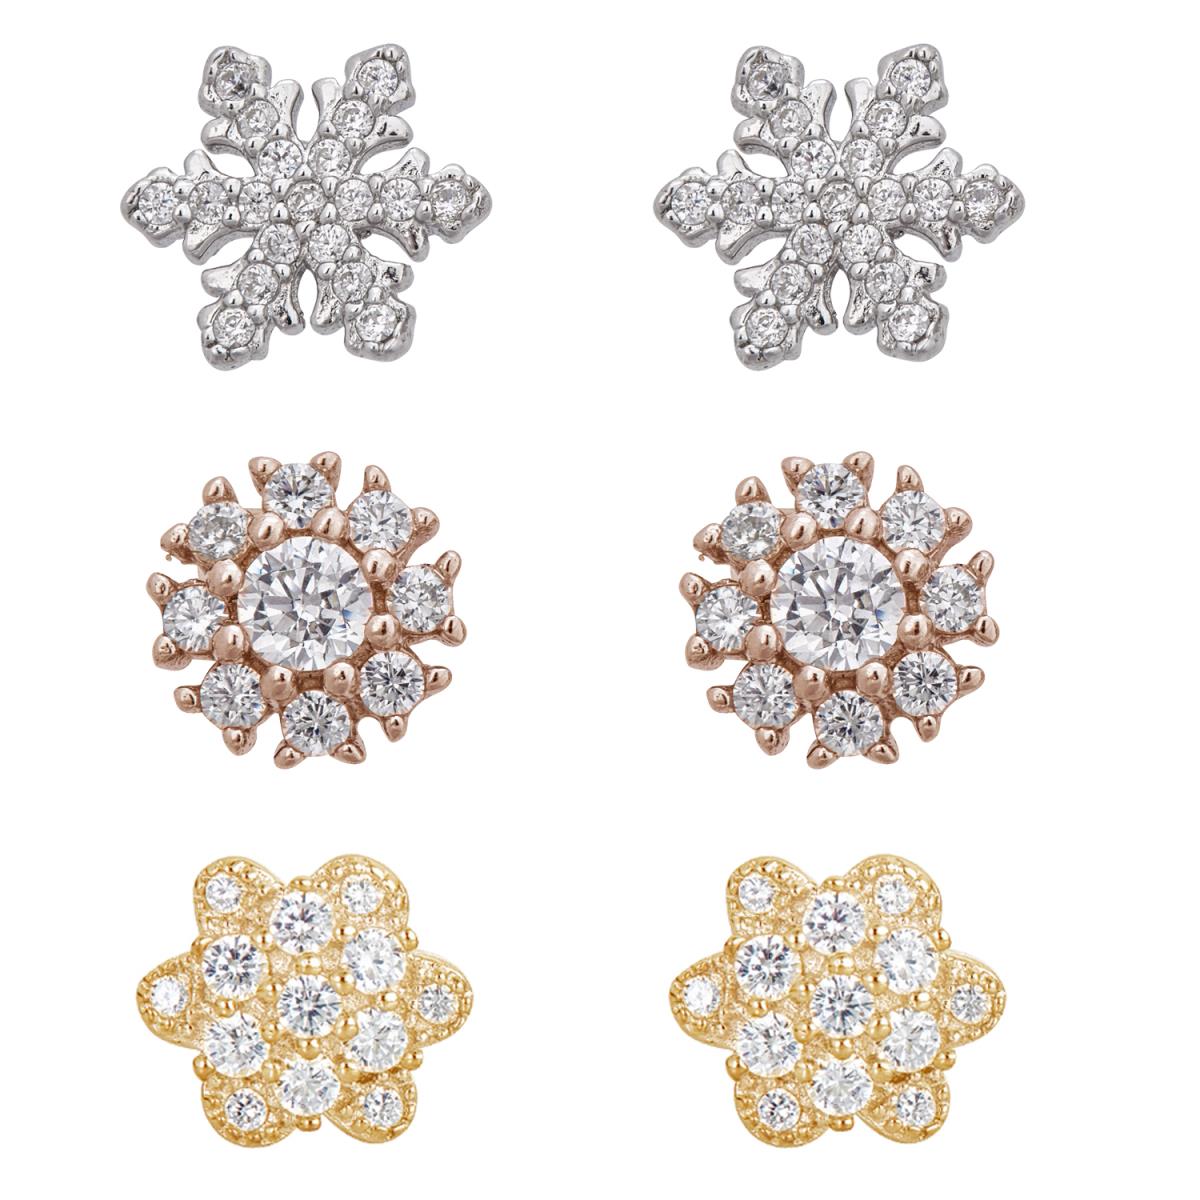 Sterling Silver Tricolor Pave Snowflake and Flower Stud Set